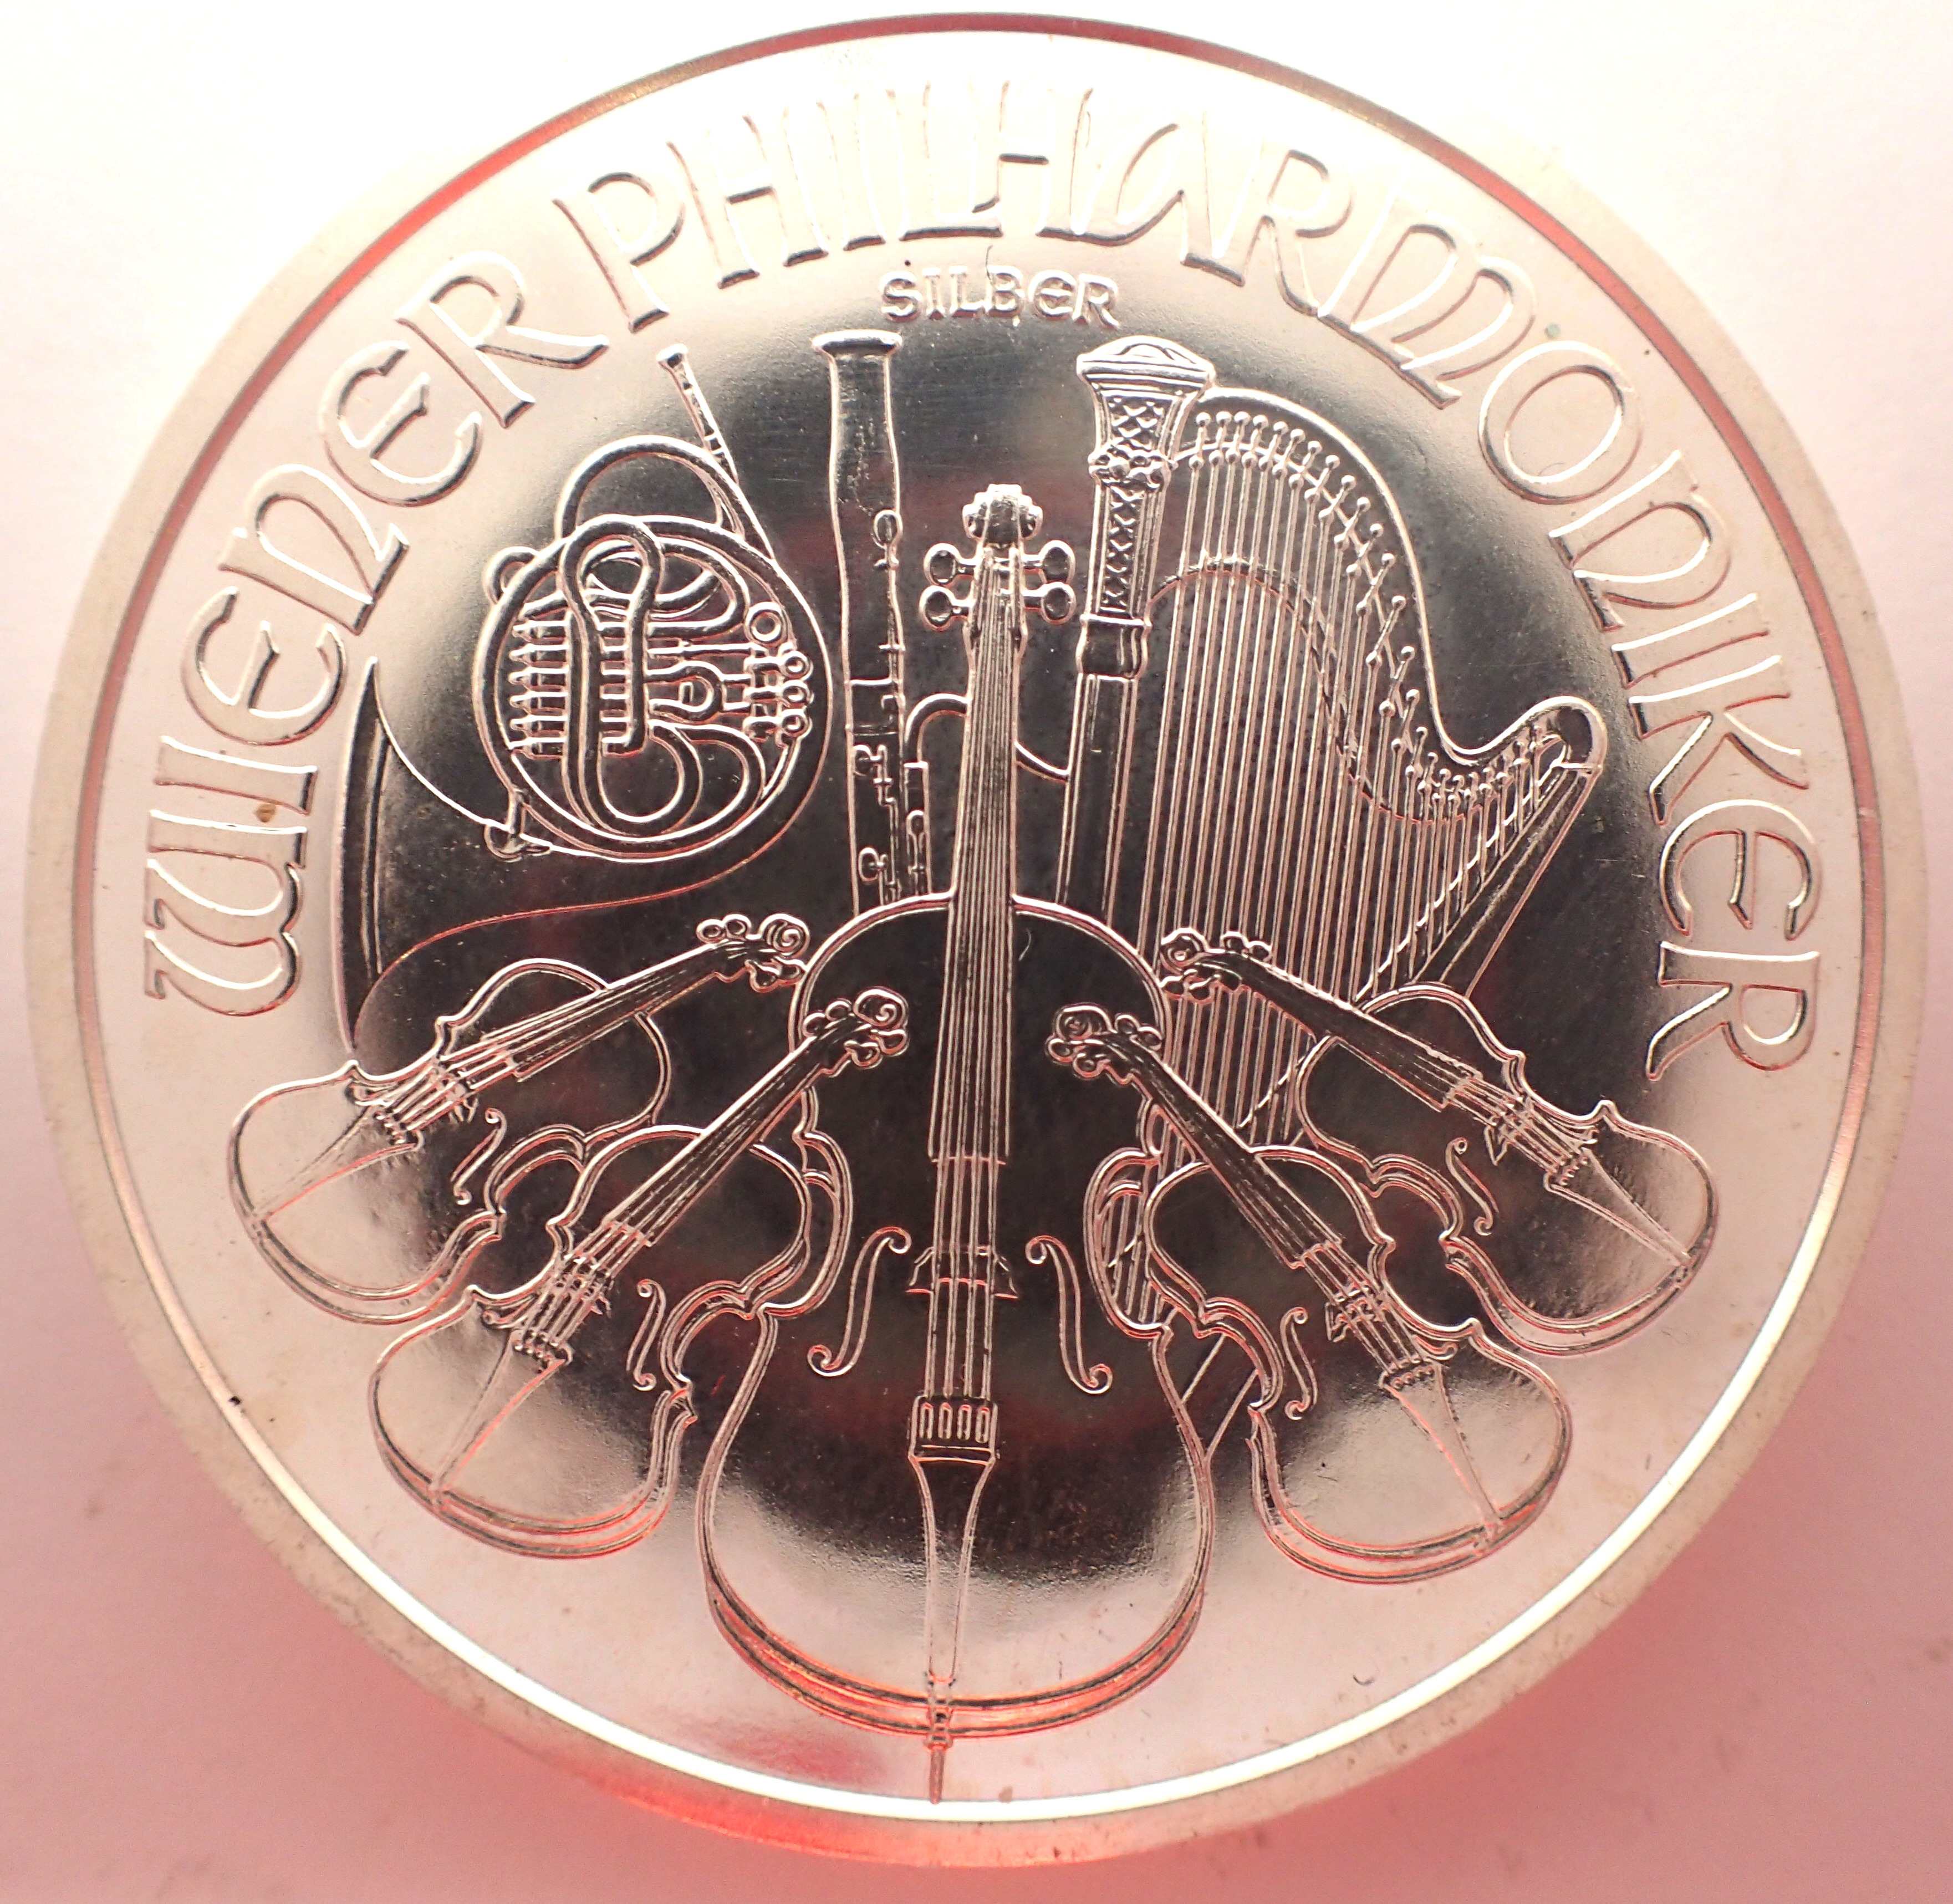 2015 999 silver bullion round, Wiener Philharmoniker, 1oz. P&P Group 1 (£14+VAT for the first lot